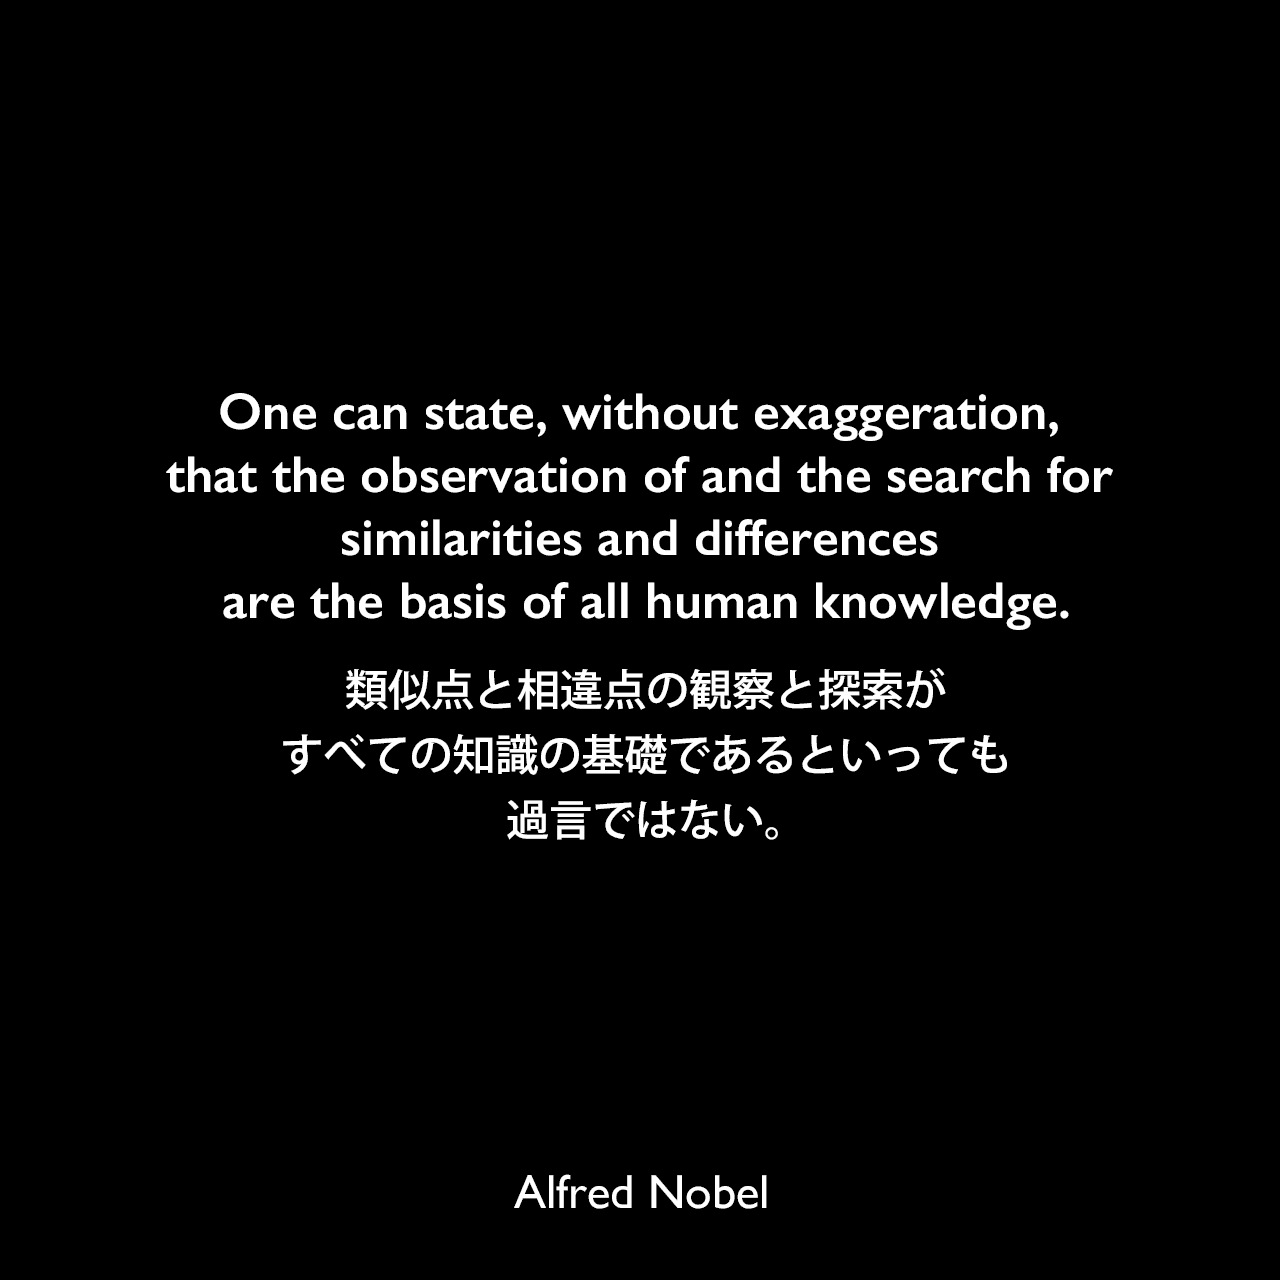 One can state, without exaggeration, that the observation of and the search for similarities and differences are the basis of all human knowledge.類似点と相違点の観察と探索が、すべての知識の基礎であるといっても過言ではない。Alfred Nobel